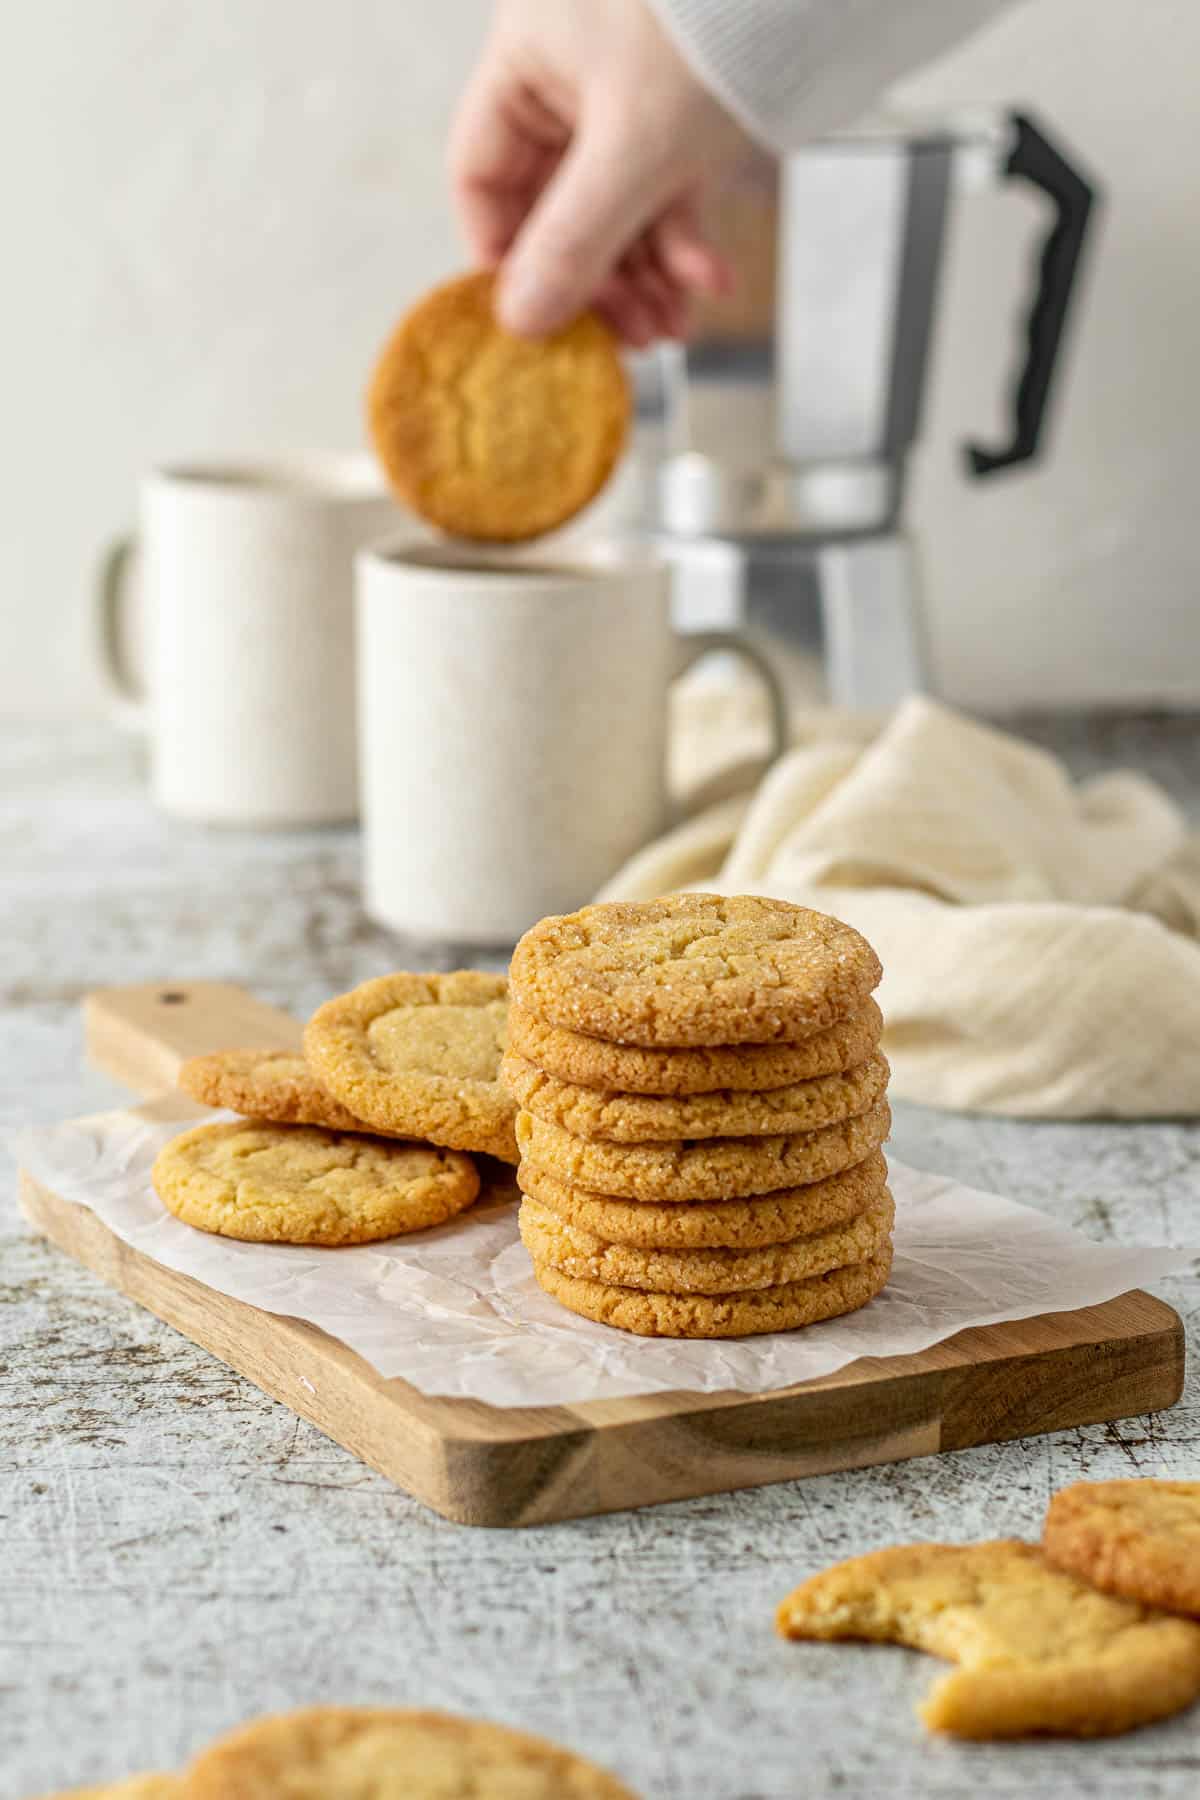 Vanilla cookies stacked on each other, with a cookie being dipped into coffee in the background.